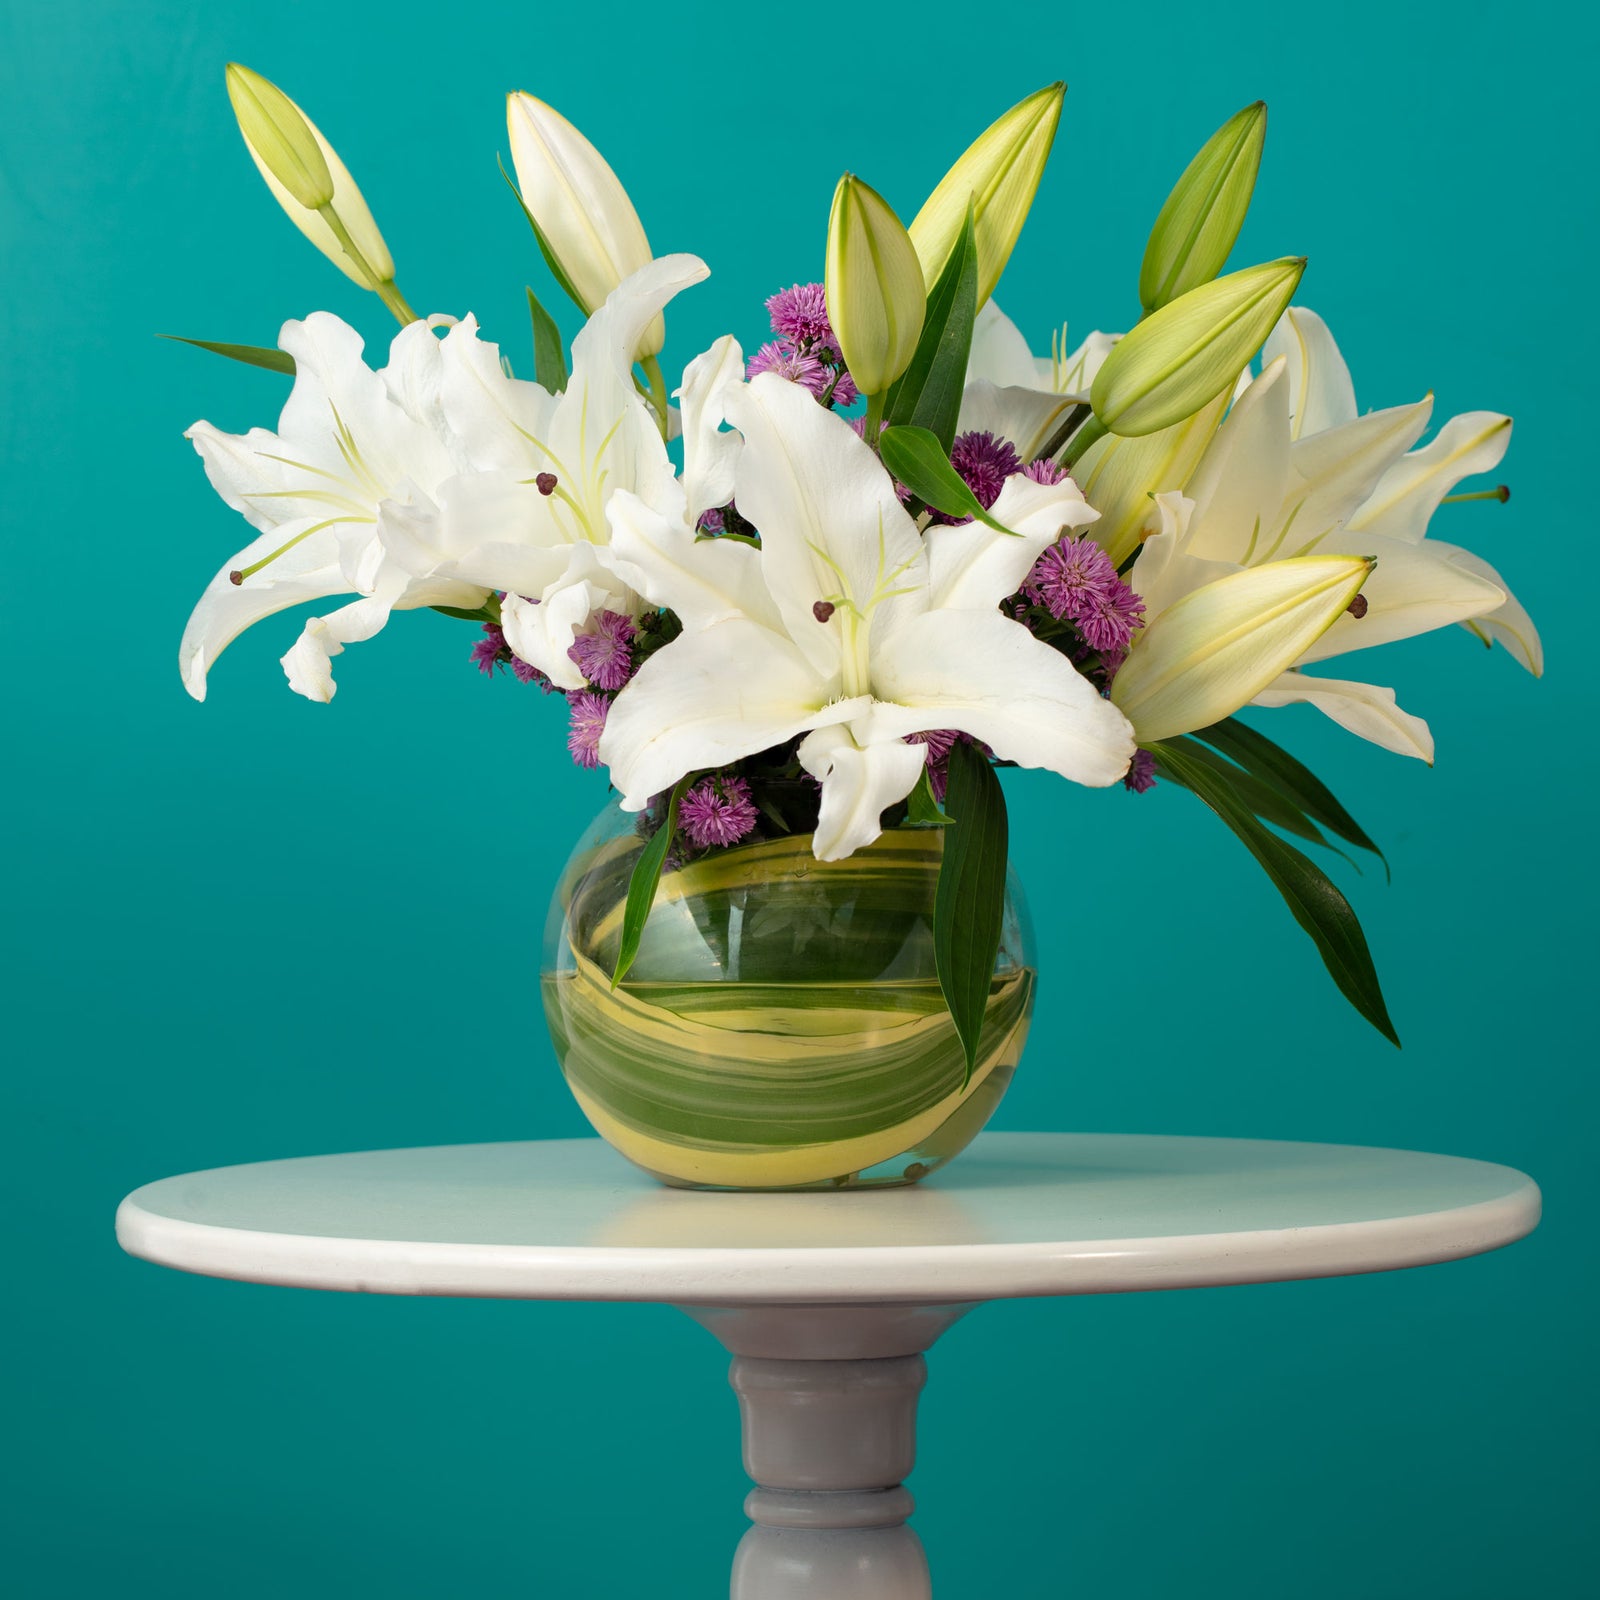 White Lilies in a Vase